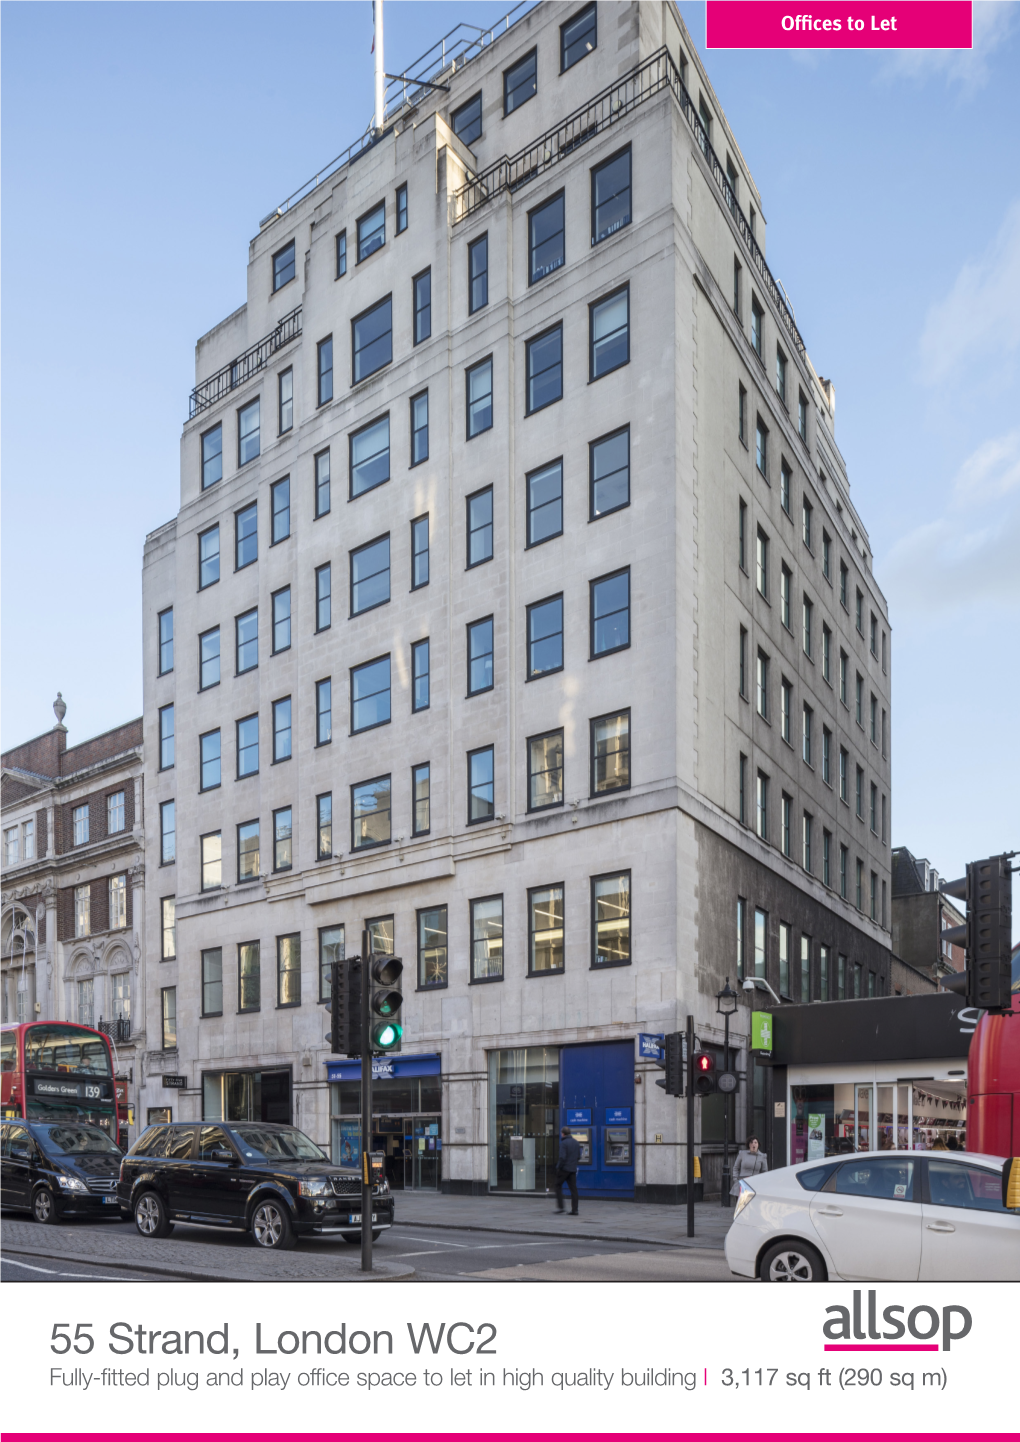 55 Strand, London WC2 Fully-Fitted Plug and Play Office Space to Let in High Quality Building L 3,117 Sq Ft (290 Sq M) LOCATION